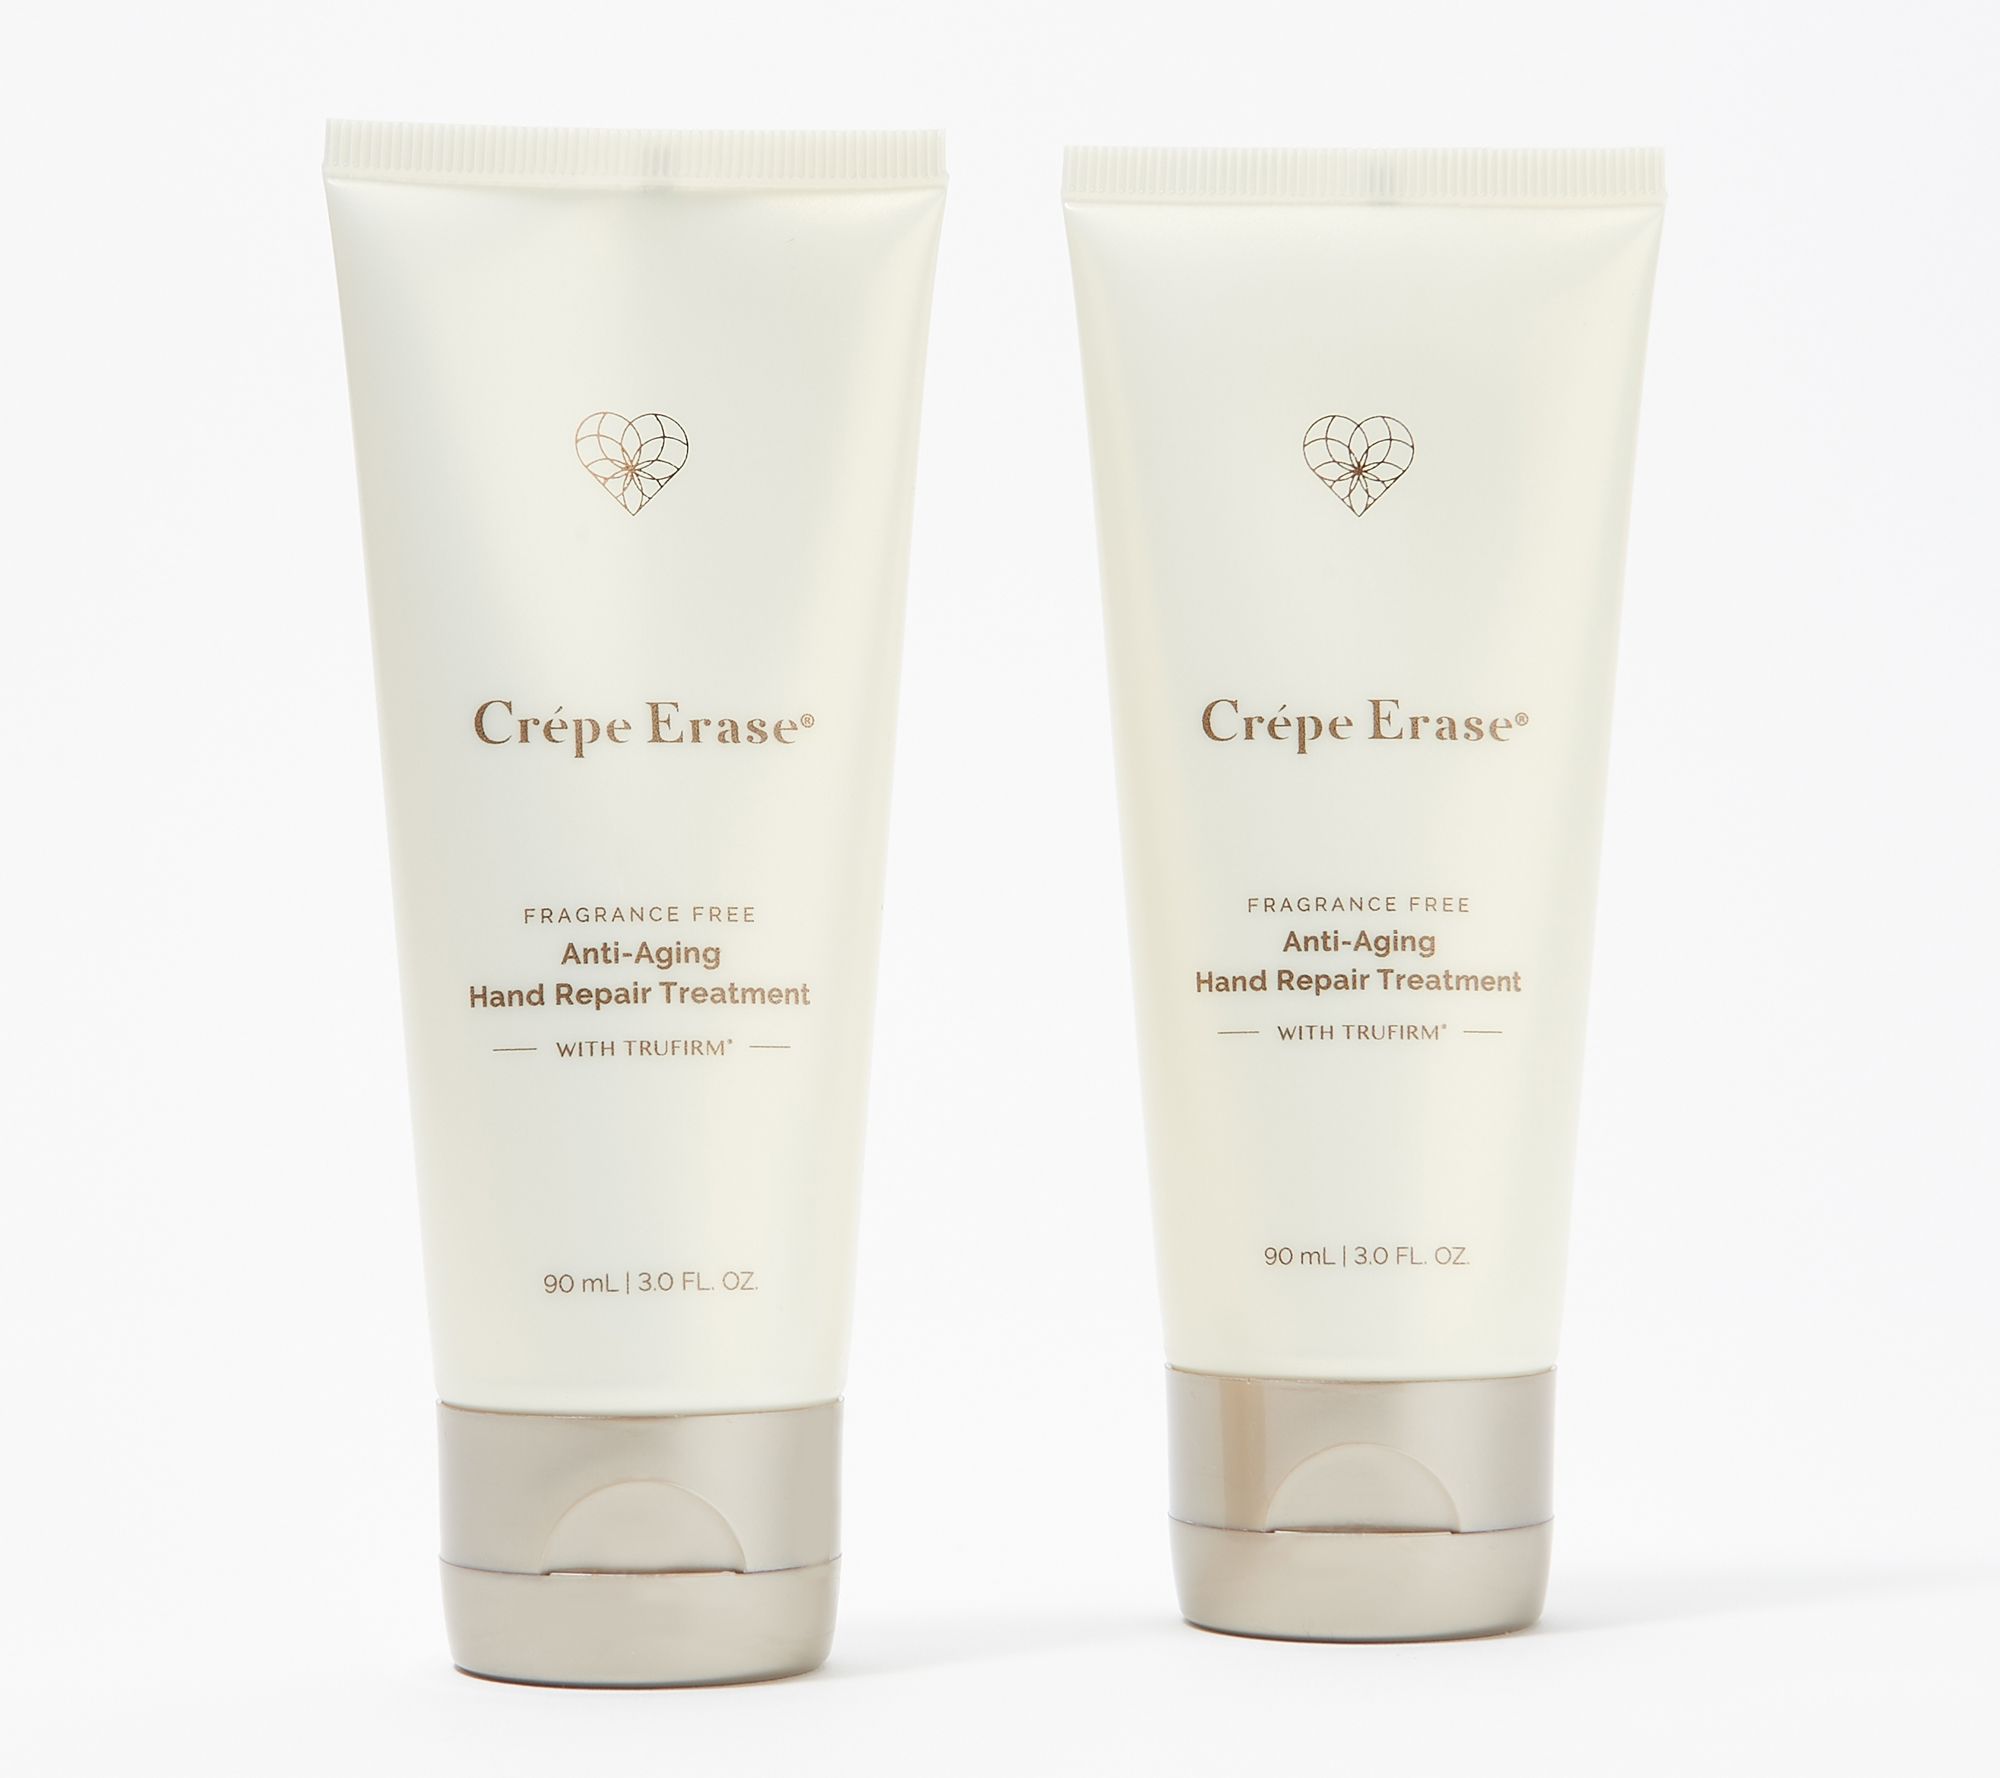 Crepe Erase Review: Do The Anti-Aging Creams Work?